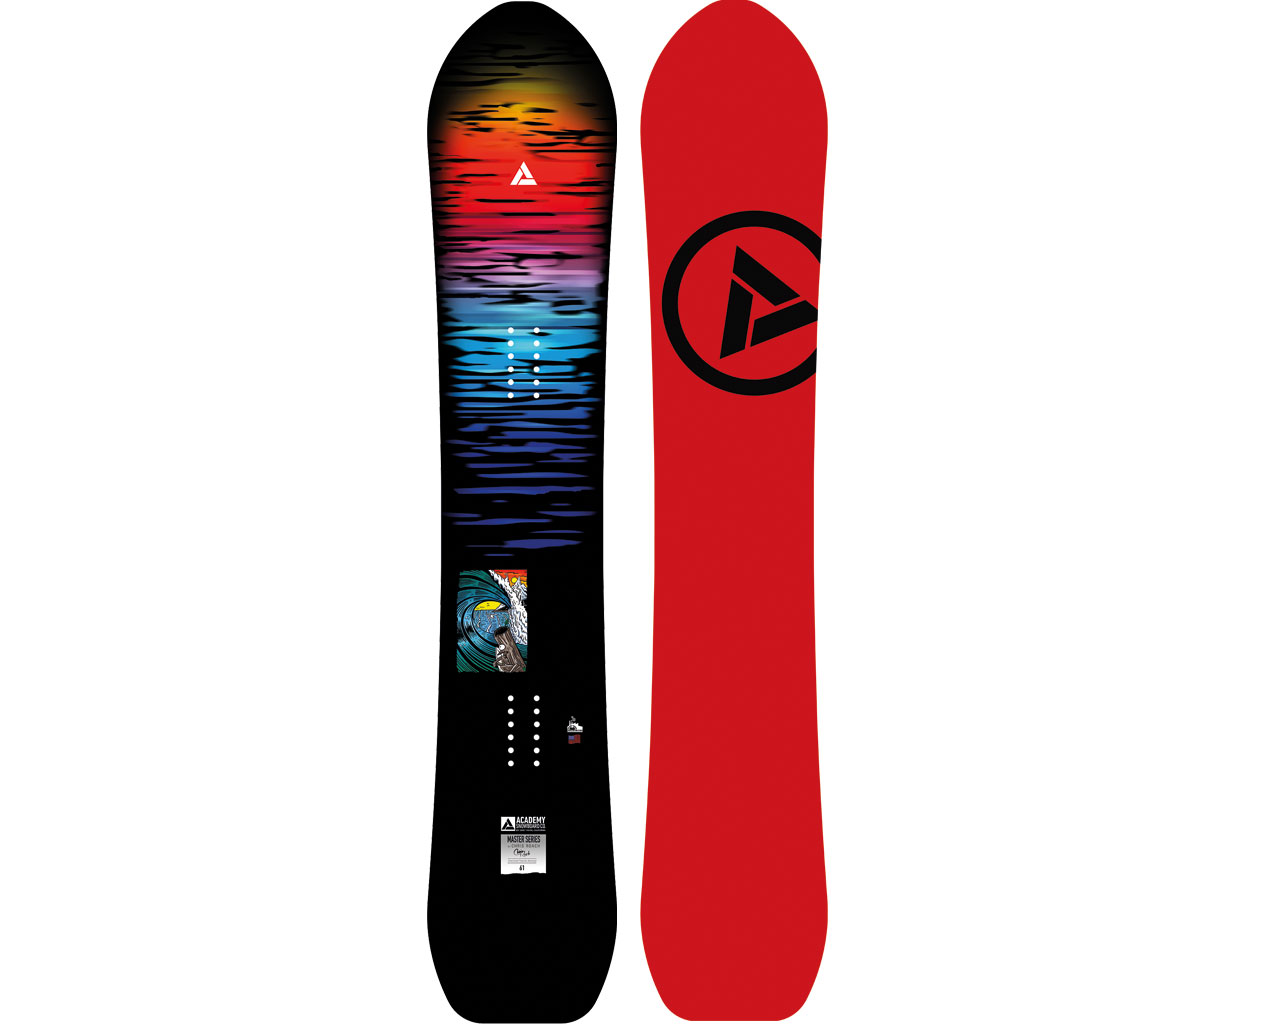 Academy Snowboards FW20/21 Snowboard Preview